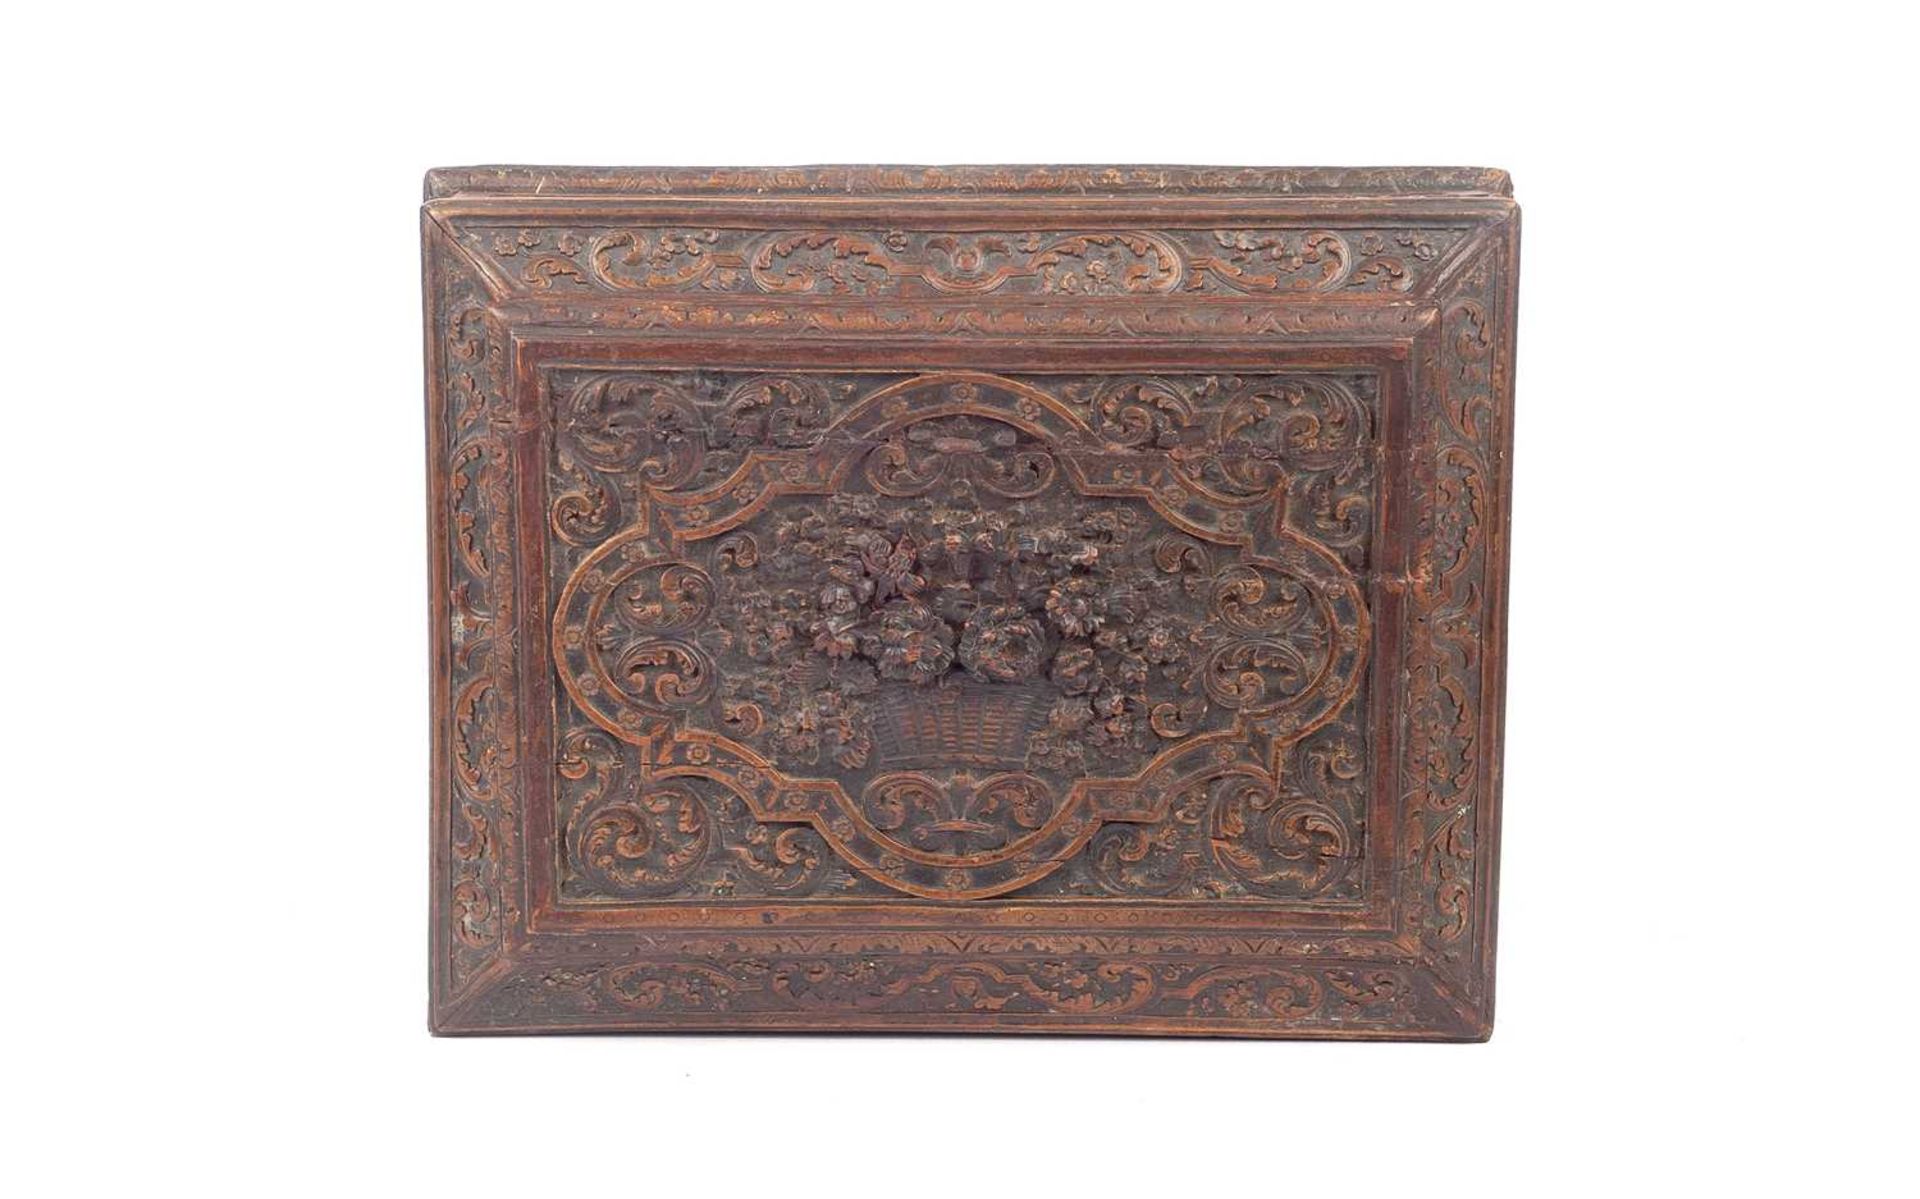 A 17TH / 18TH CENTURY CARVED FRUITWOOD BOX IN THE MANNER OF CESAR BAGARD OF NANCY, CIRCA 1700 - Image 3 of 3